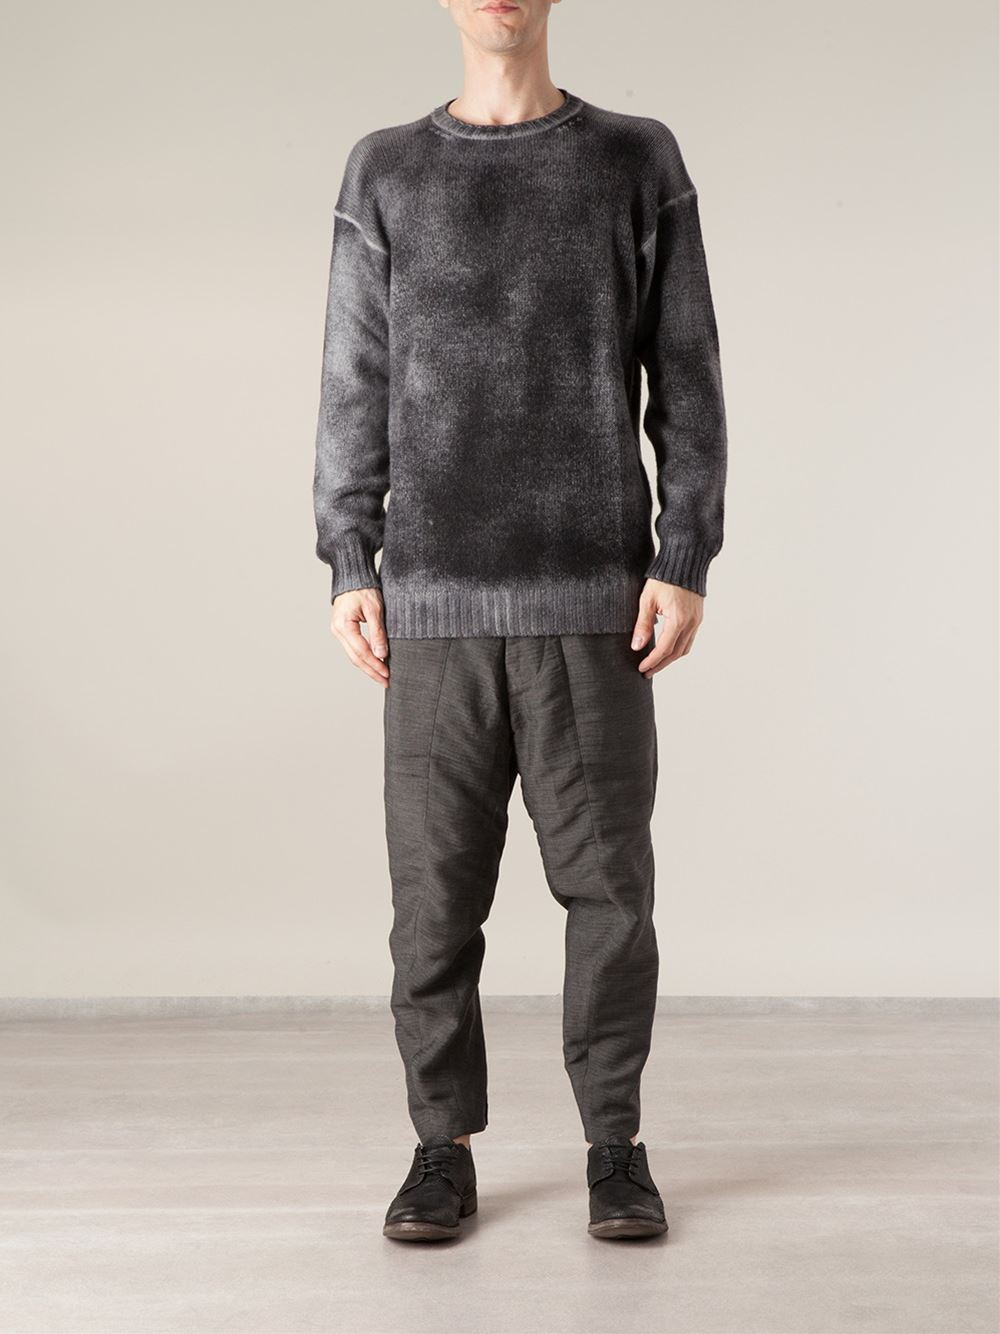 Lyst - Avant toi Distressed Jumper in Gray for Men